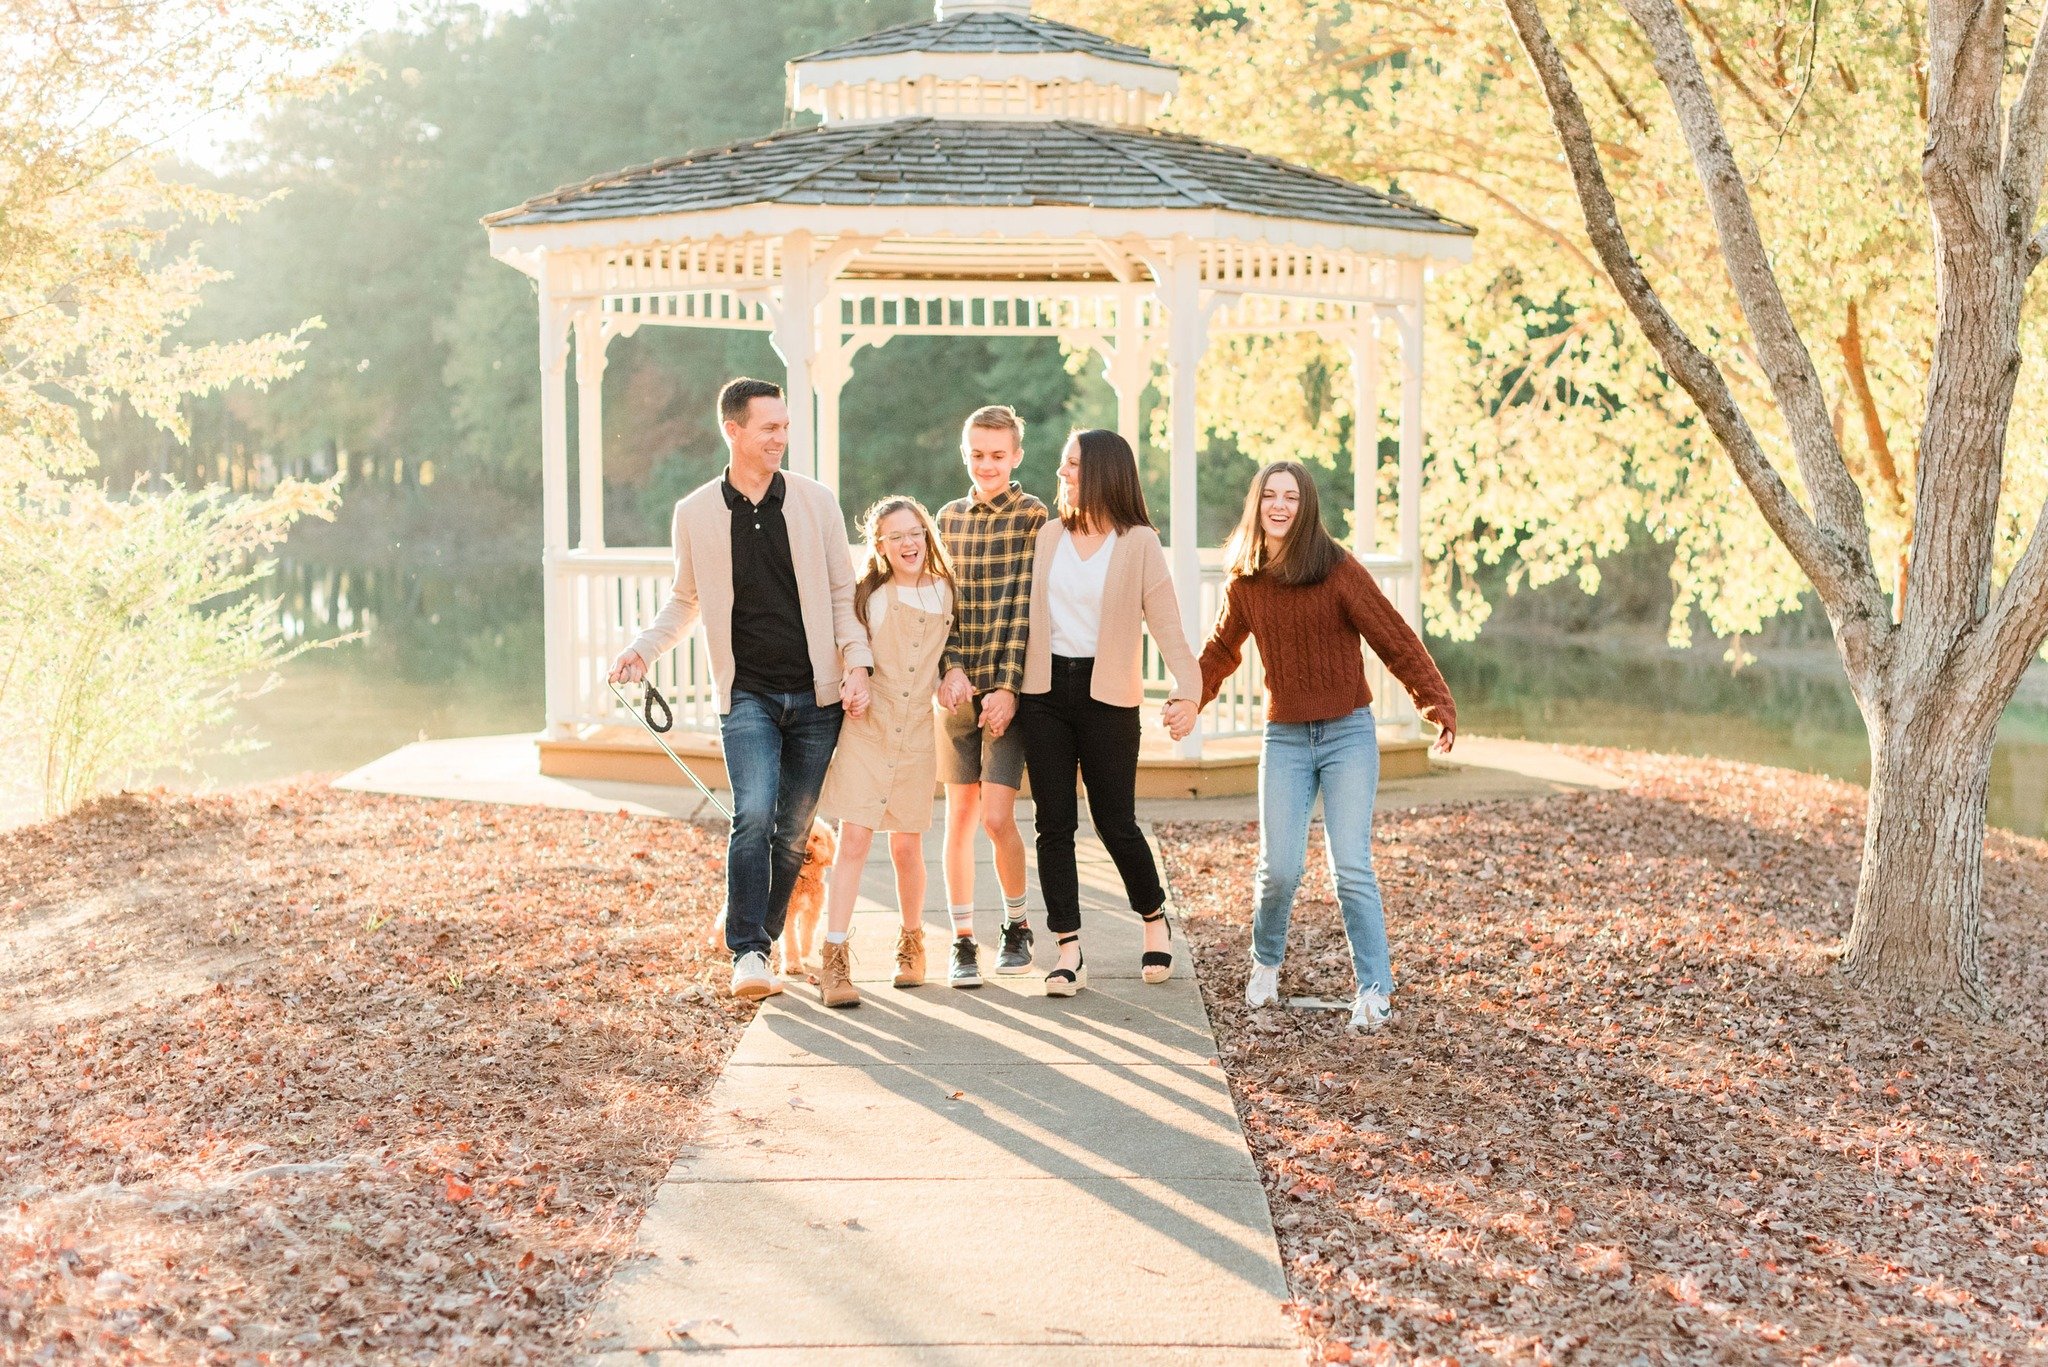 Taking family photos regularly is the perfect way to document each phase of your family. Not only will it help you track how everyone grows and changes, but it's also like having a visual diary of your lives together. Trust me, it&rsquo;s something a